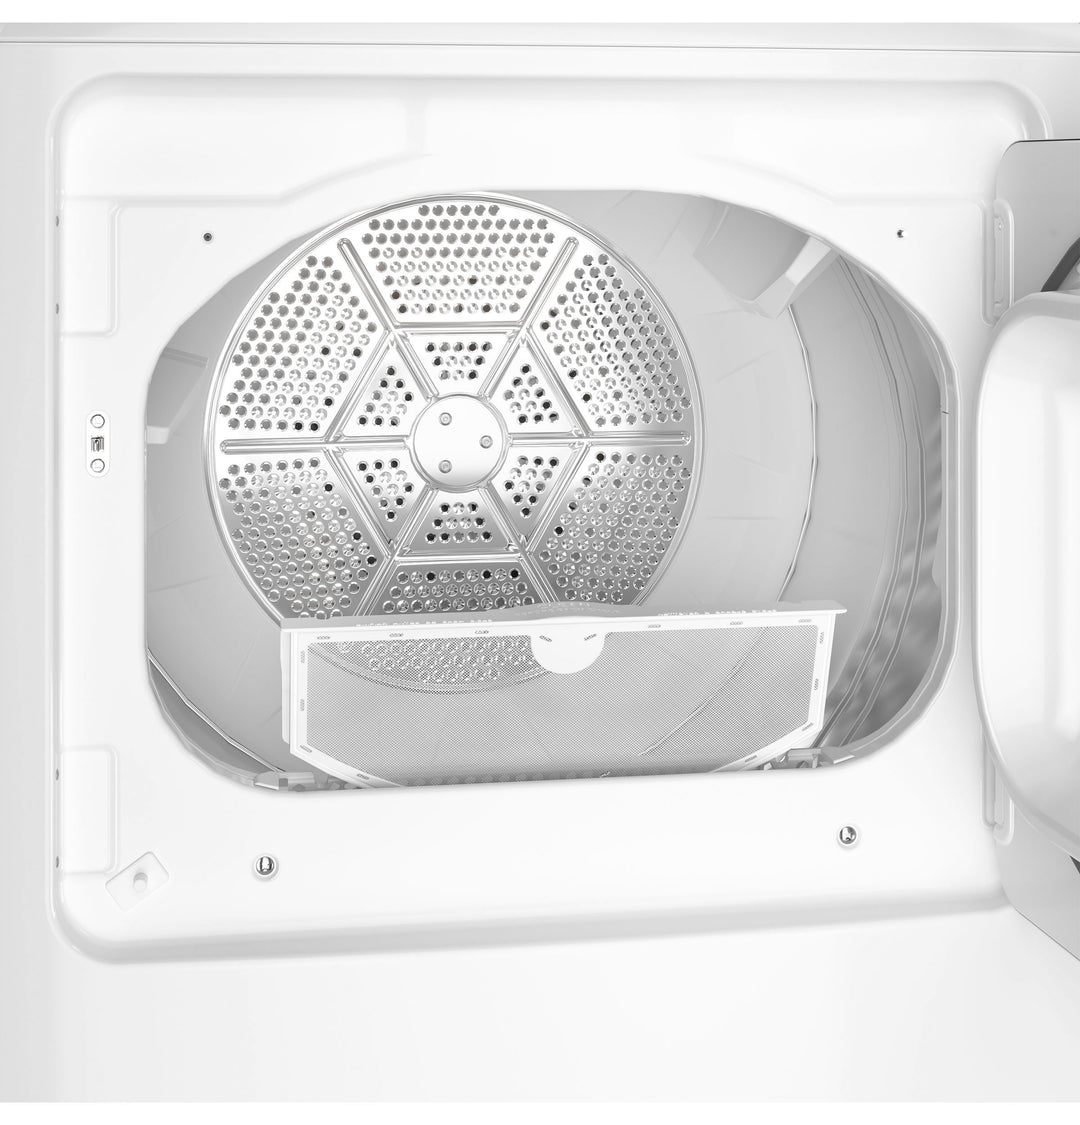 GE - 7.2 Cu. Ft. Gas Dryer with Long Venting up to 120 Ft. - White with Silver Matte_3